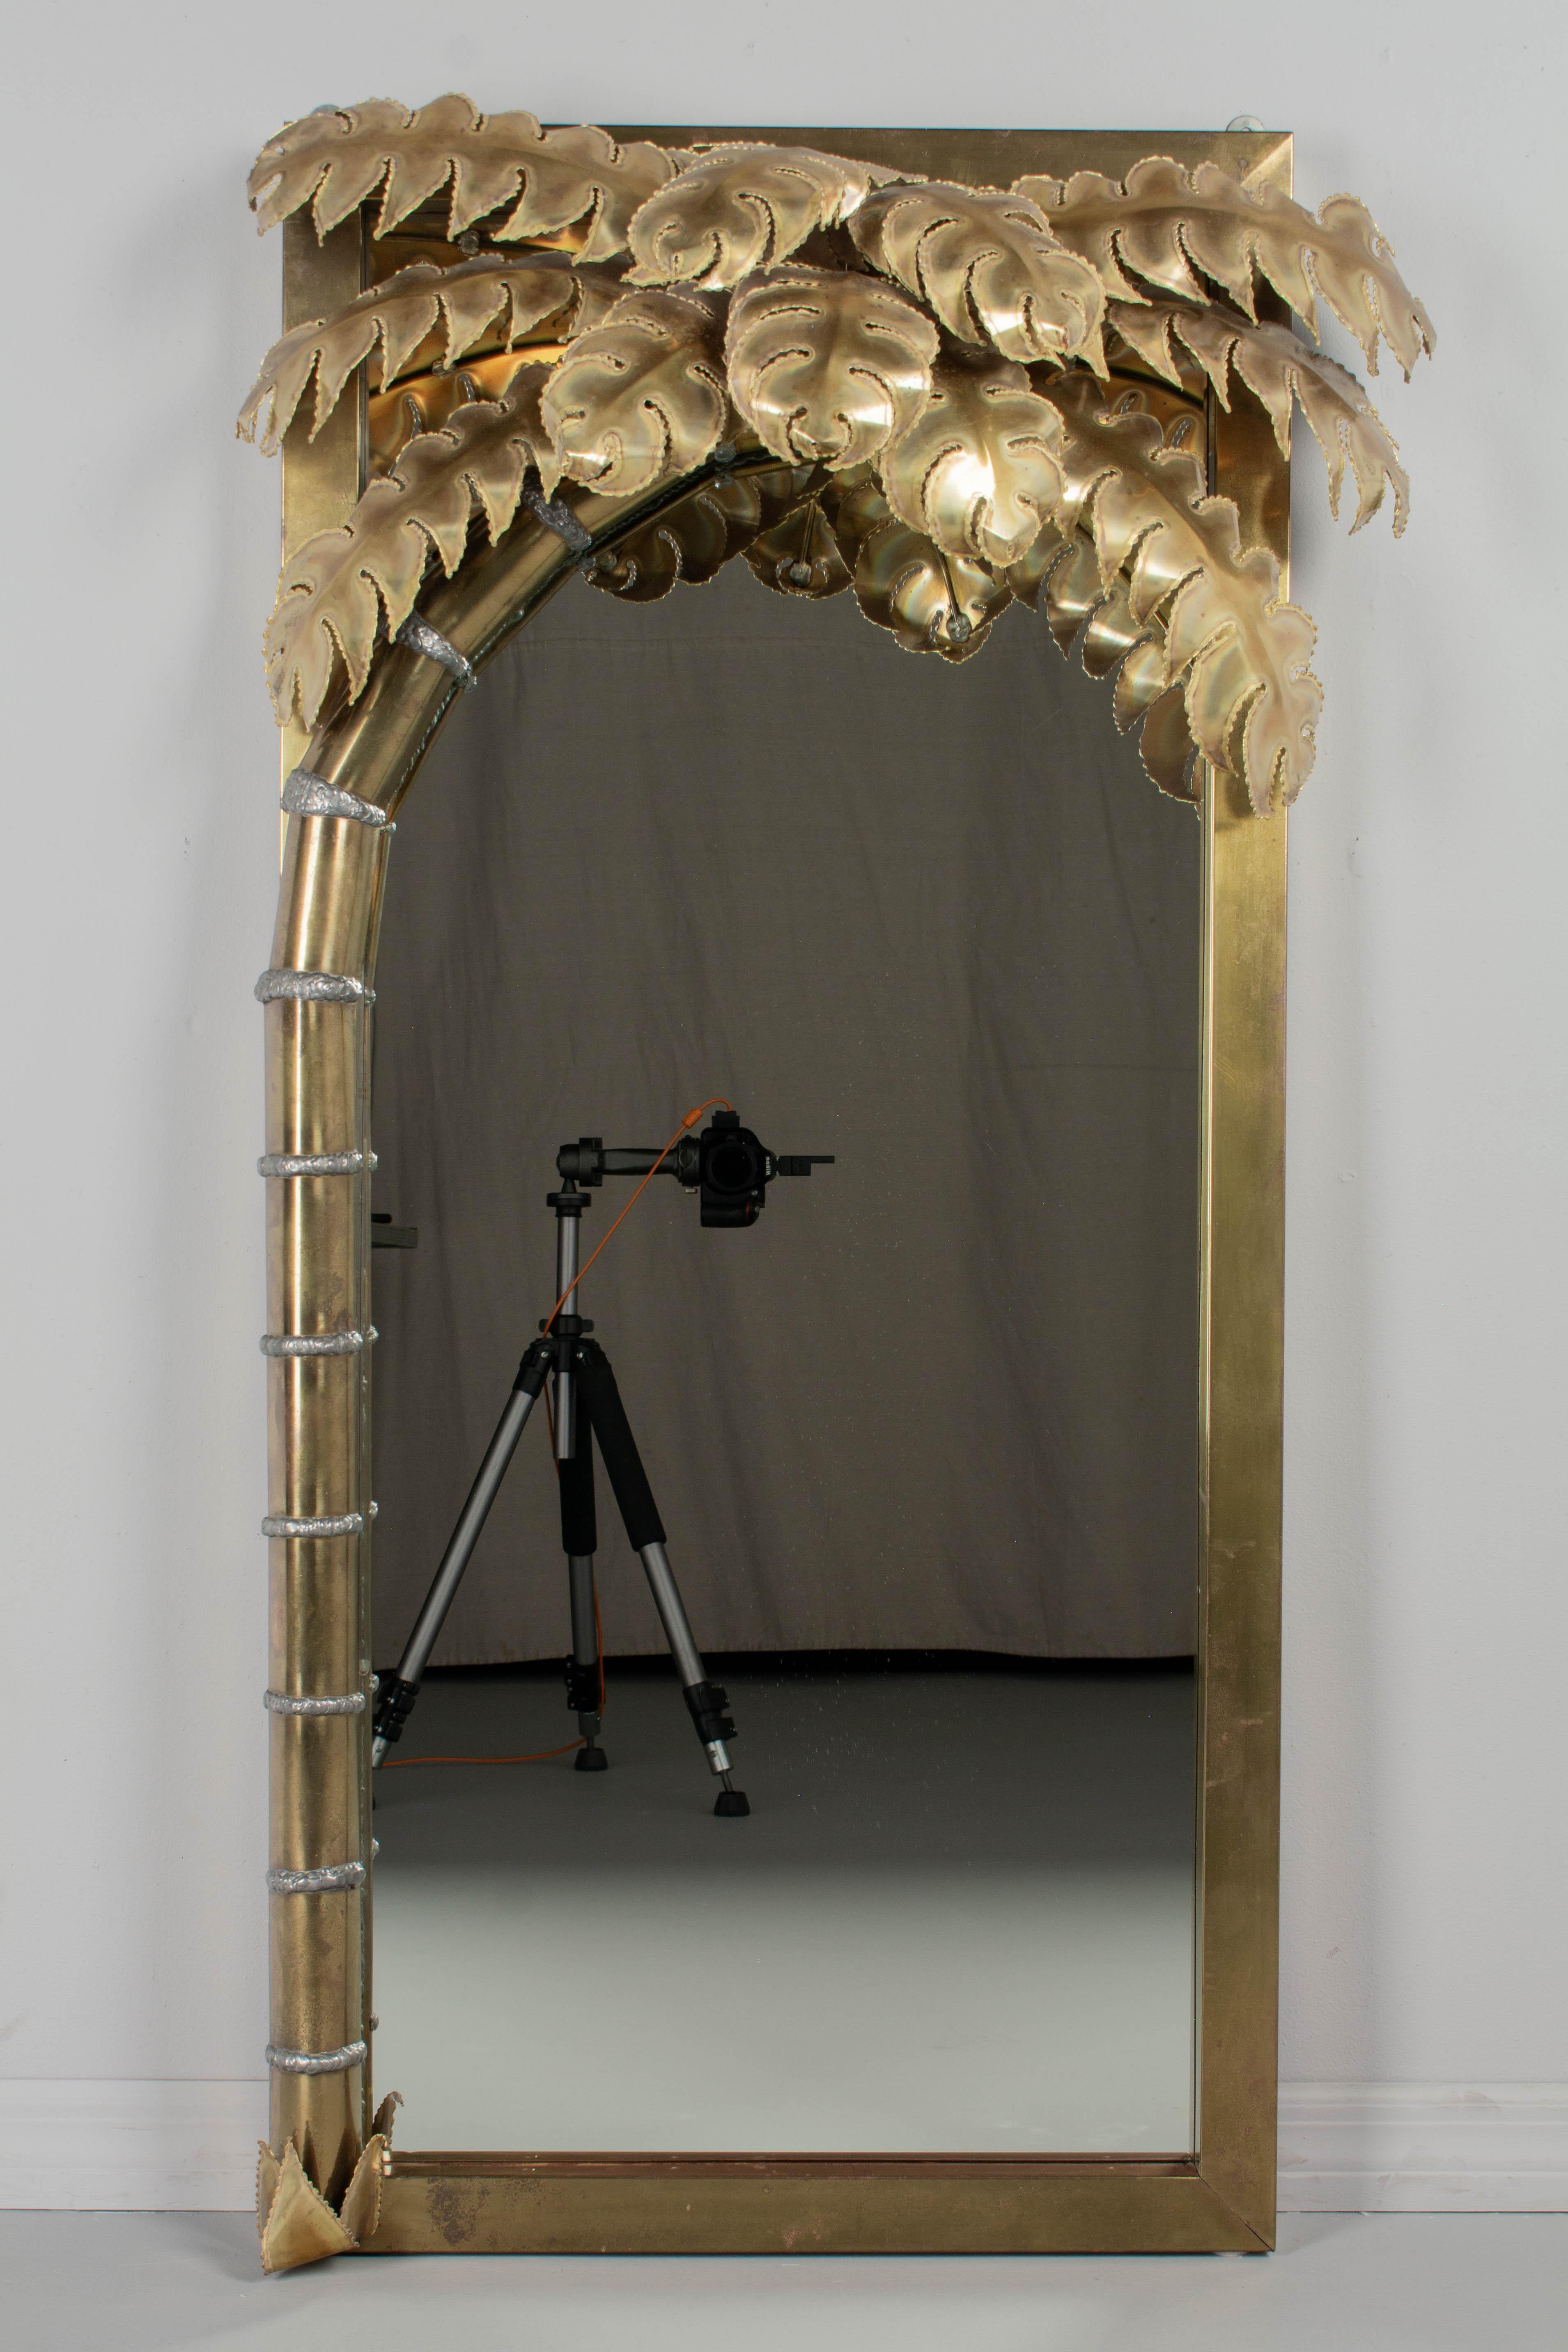 An iconic brass palm tree illuminated wall mirror designed by Christian Techoueyres for Maison Jansen. Crafted of brass sheet metal over wood with a canopy of torch cut and welded burnished brass palm fronds. The metal is in good condition, with a